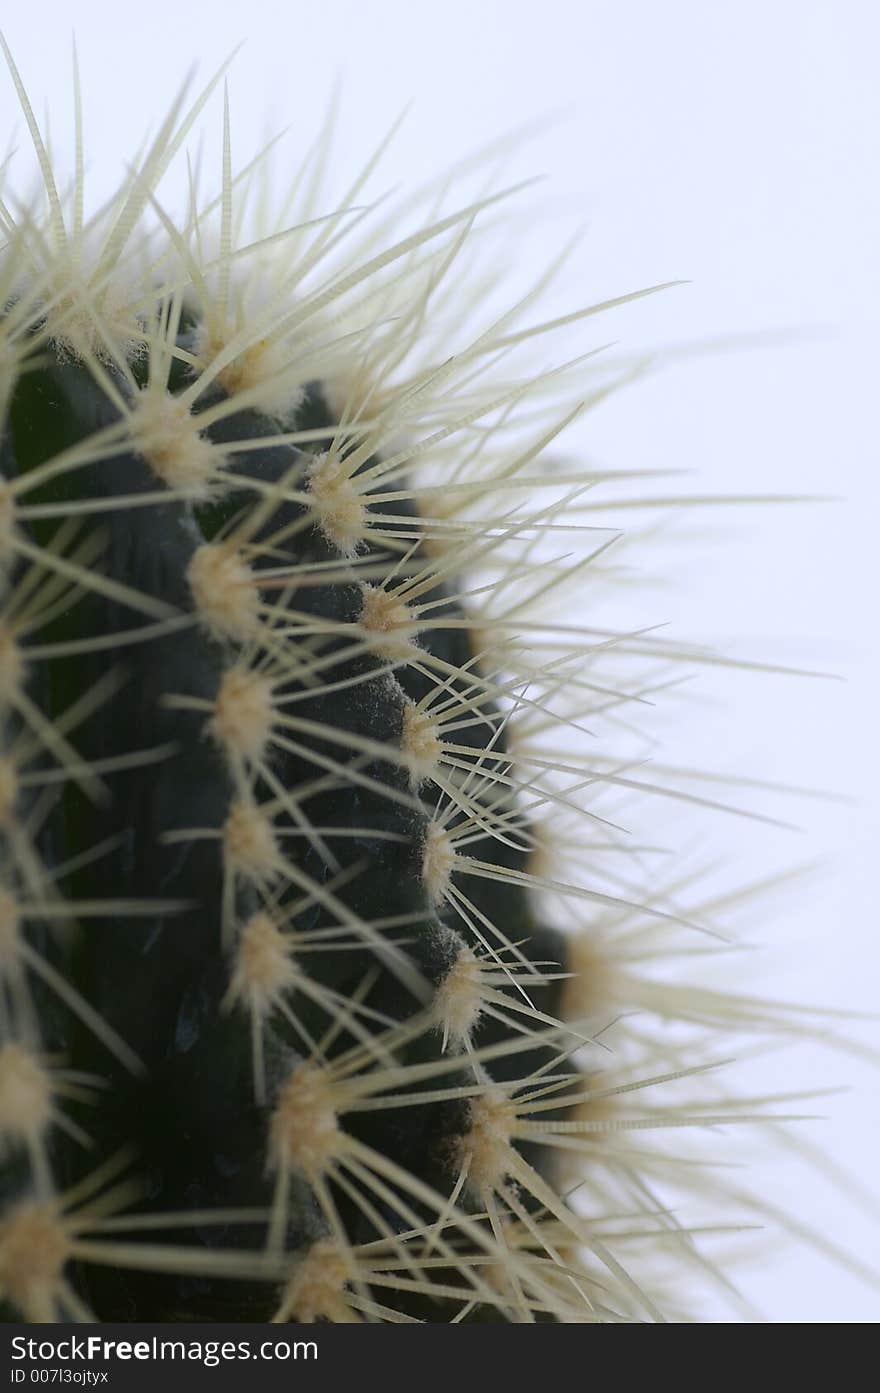 Closeup of a cactus against a white background